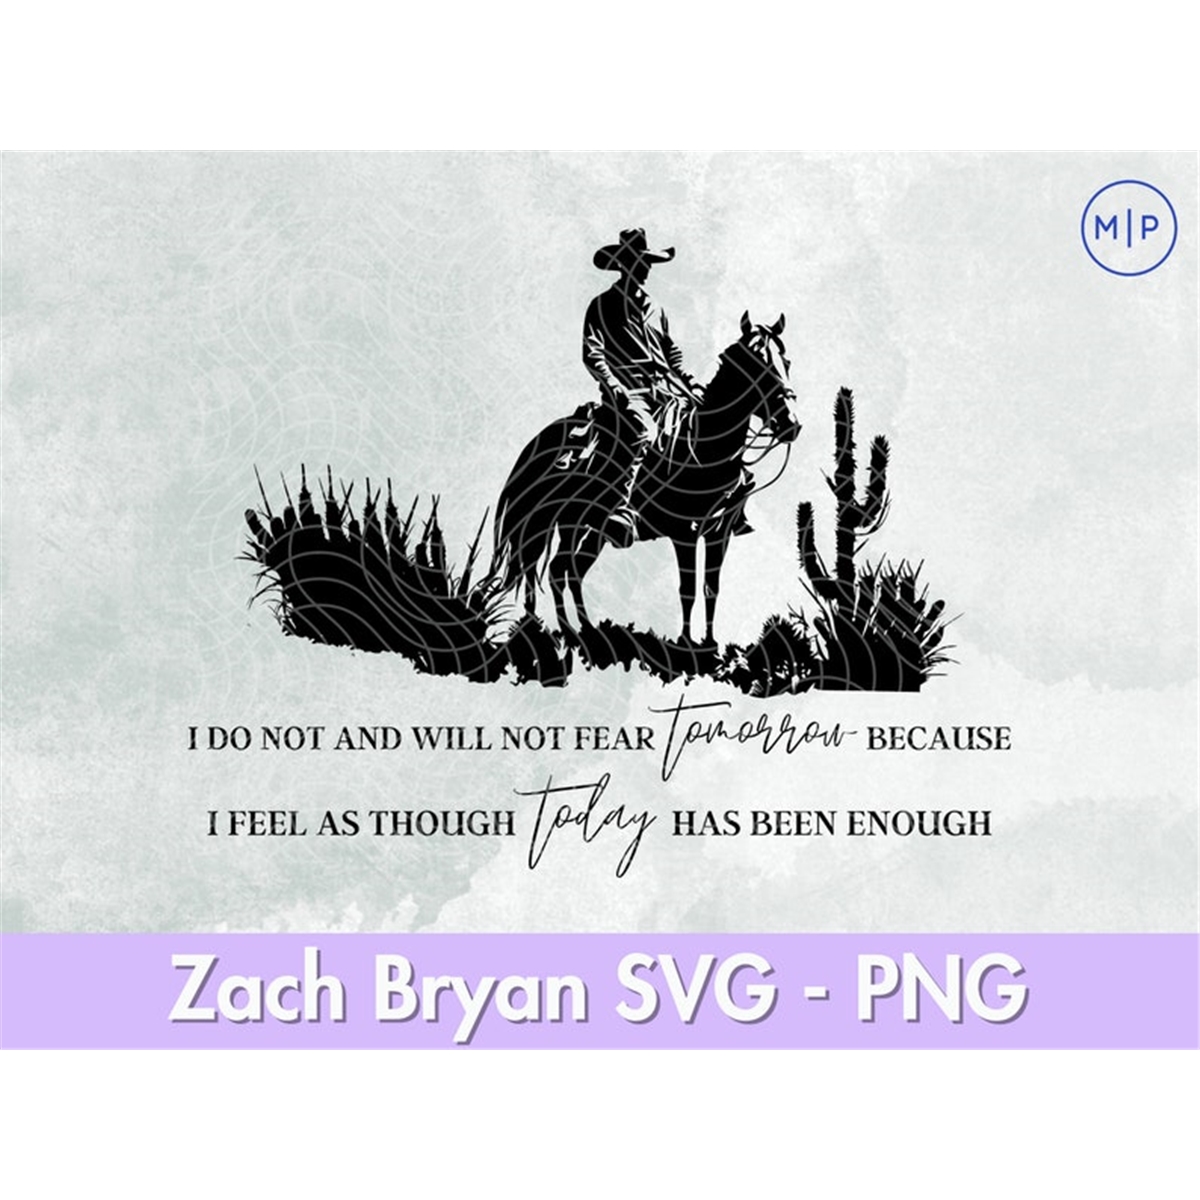 i-do-not-and-will-not-fear-tomorrow-zach-bryan-png-zach-bryan-image-1